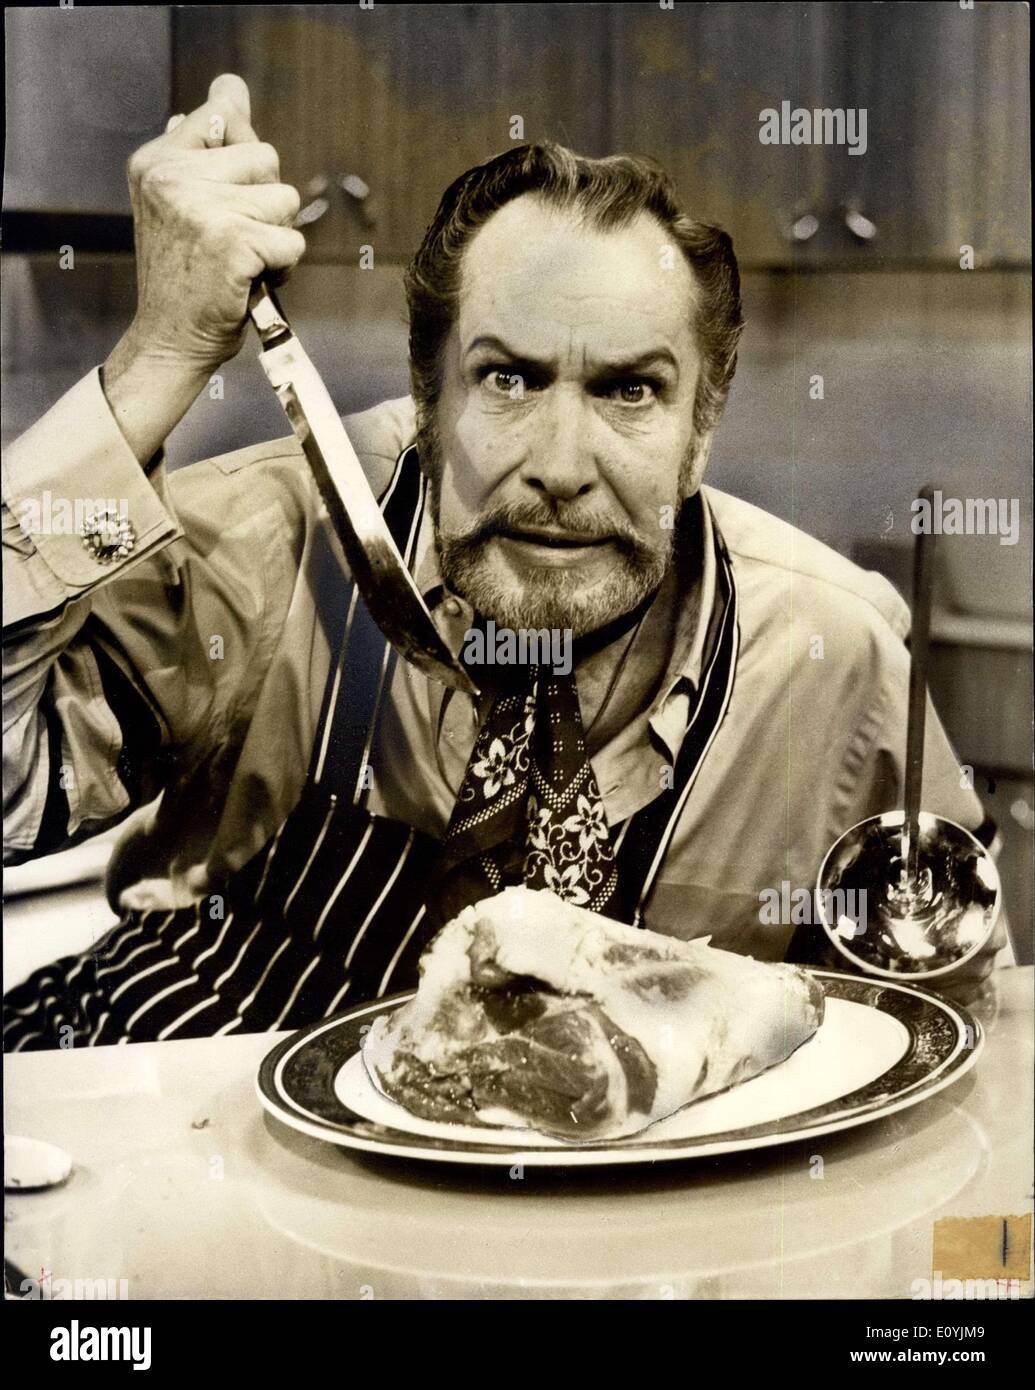 Jul. 13, 1970 - Vincent Price to star in cookery series fro thanes television: Film star Vincent Price, ''Horror King'' of American movies, is in London for a week to star in his own cookery series for Thames Television. Price, who has made over 80 films, is also a famous amateur chef and connoisseur of good food. he has written several books on the subject but this is the first time he has starred in a cookery series. The series is scheduled for transmission in the New Year Stock Photo